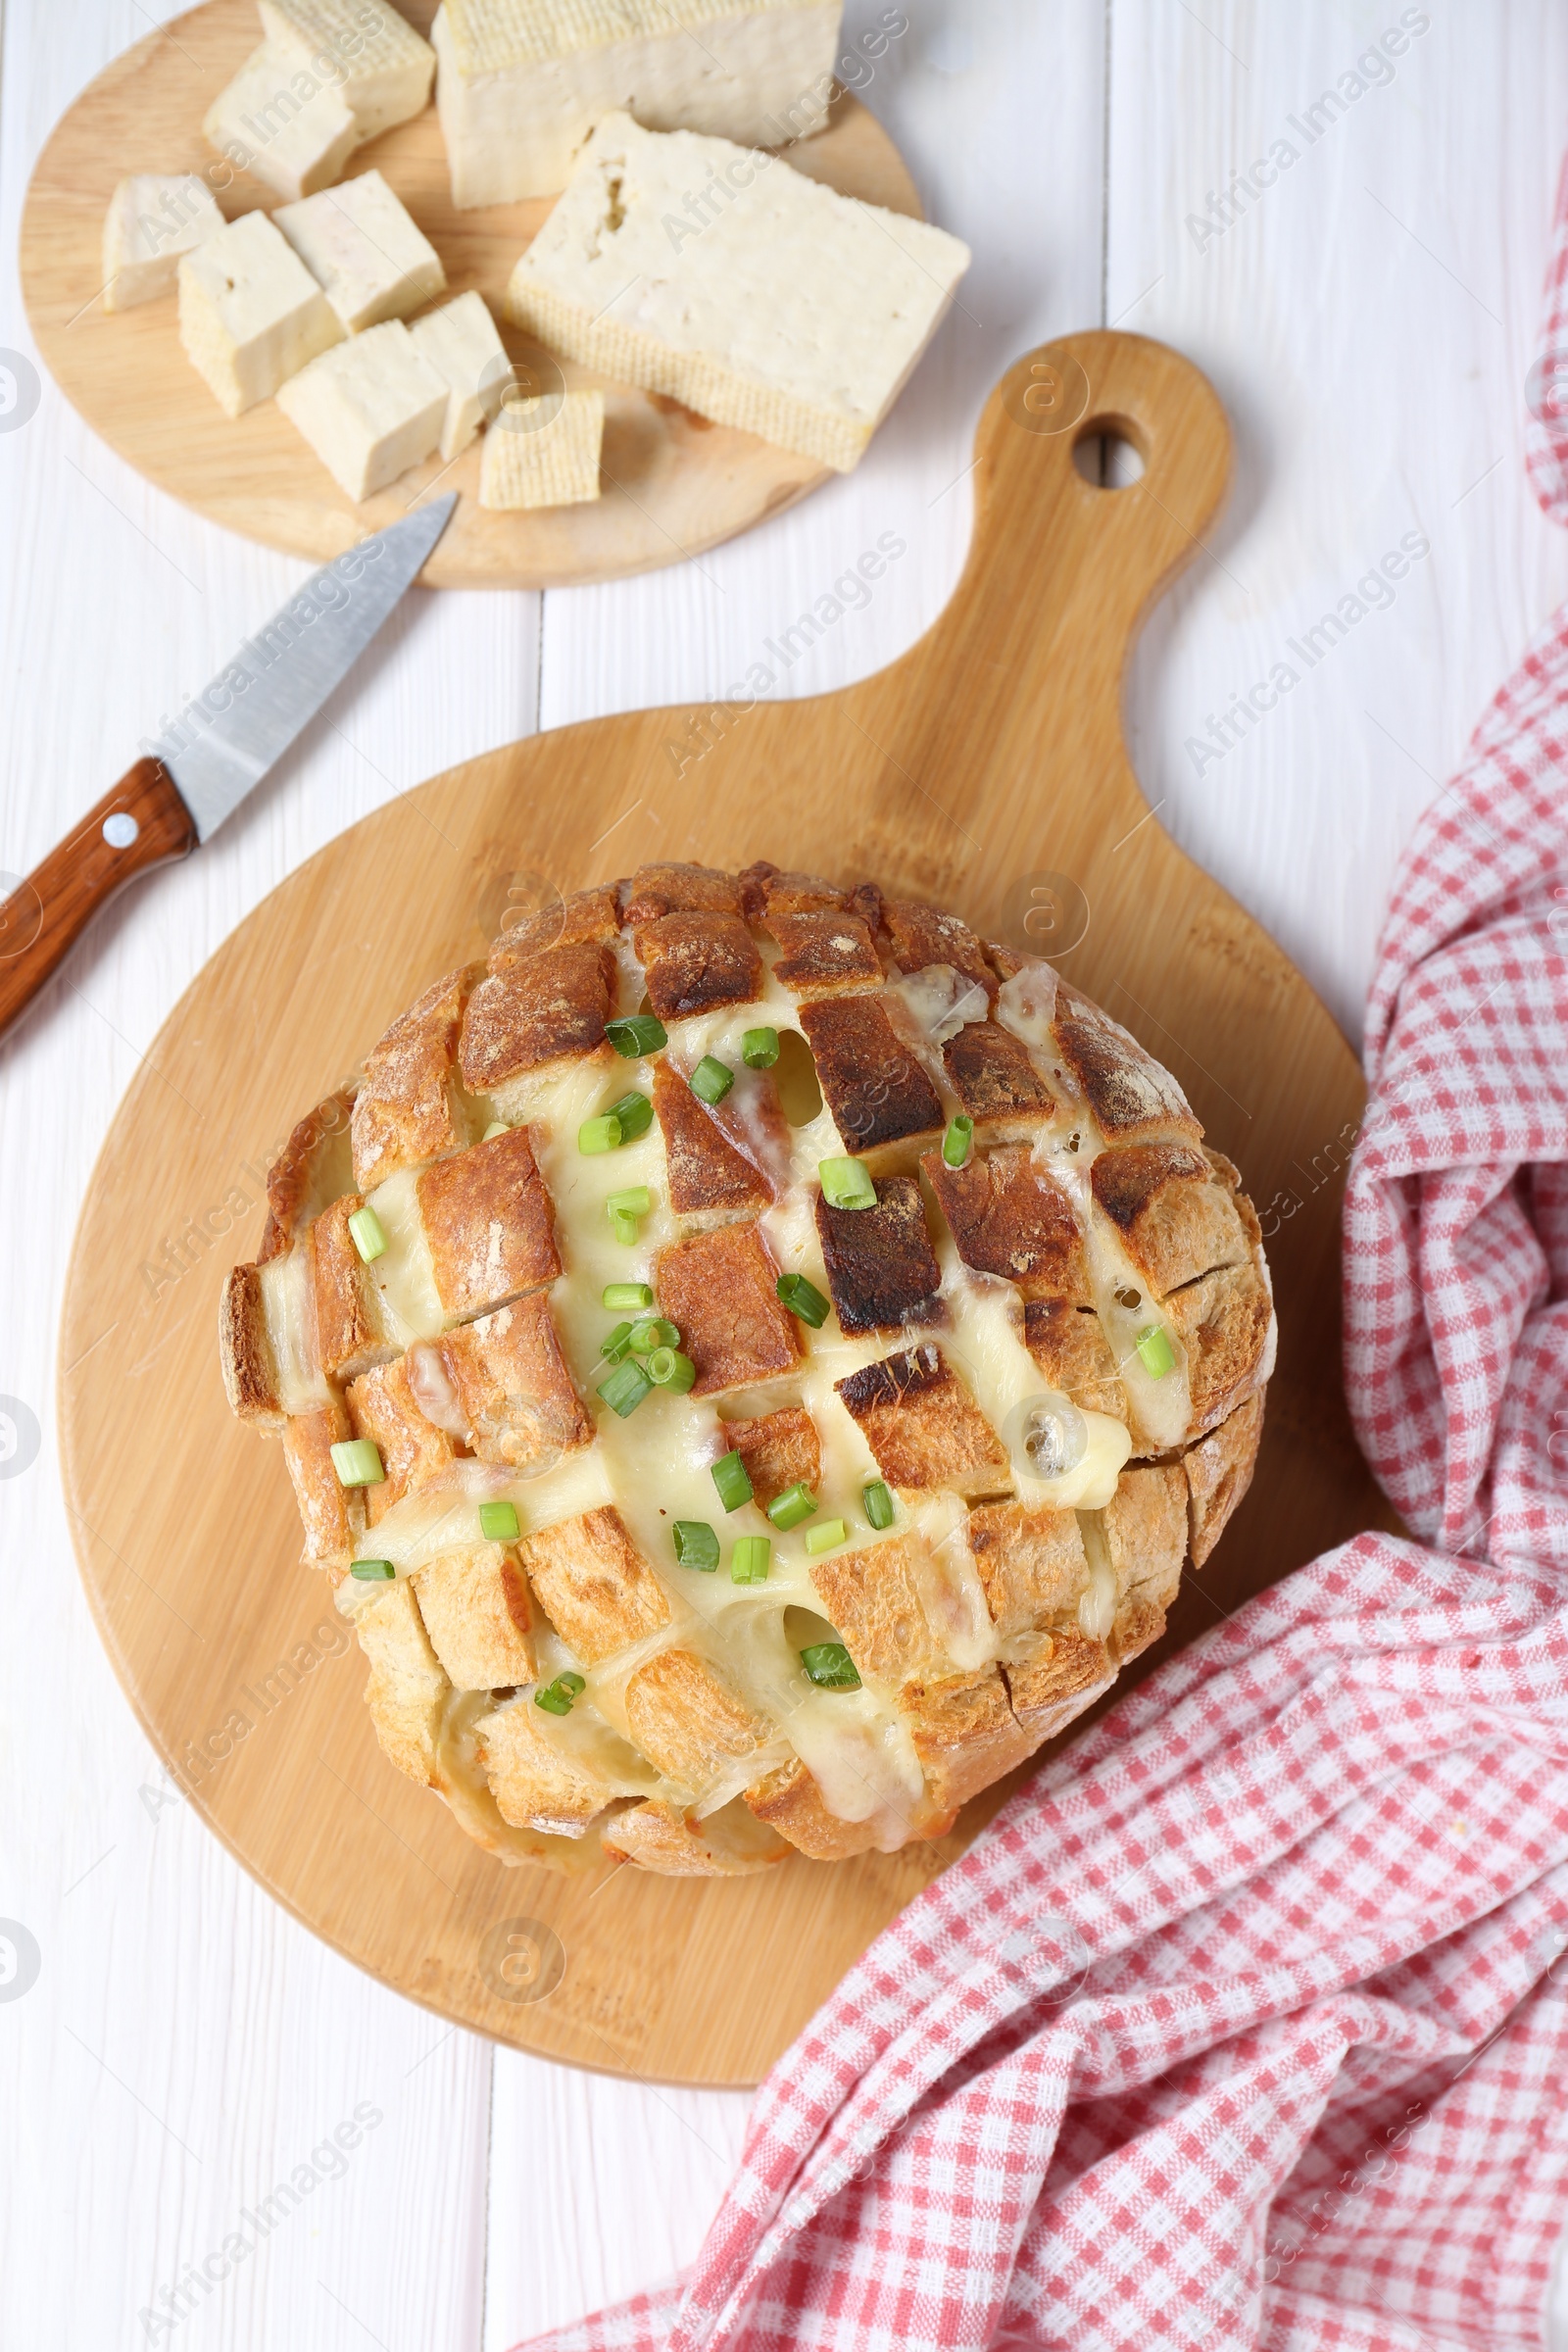 Photo of Freshly baked bread with tofu cheese, green onions and knife on white wooden table, flat lay